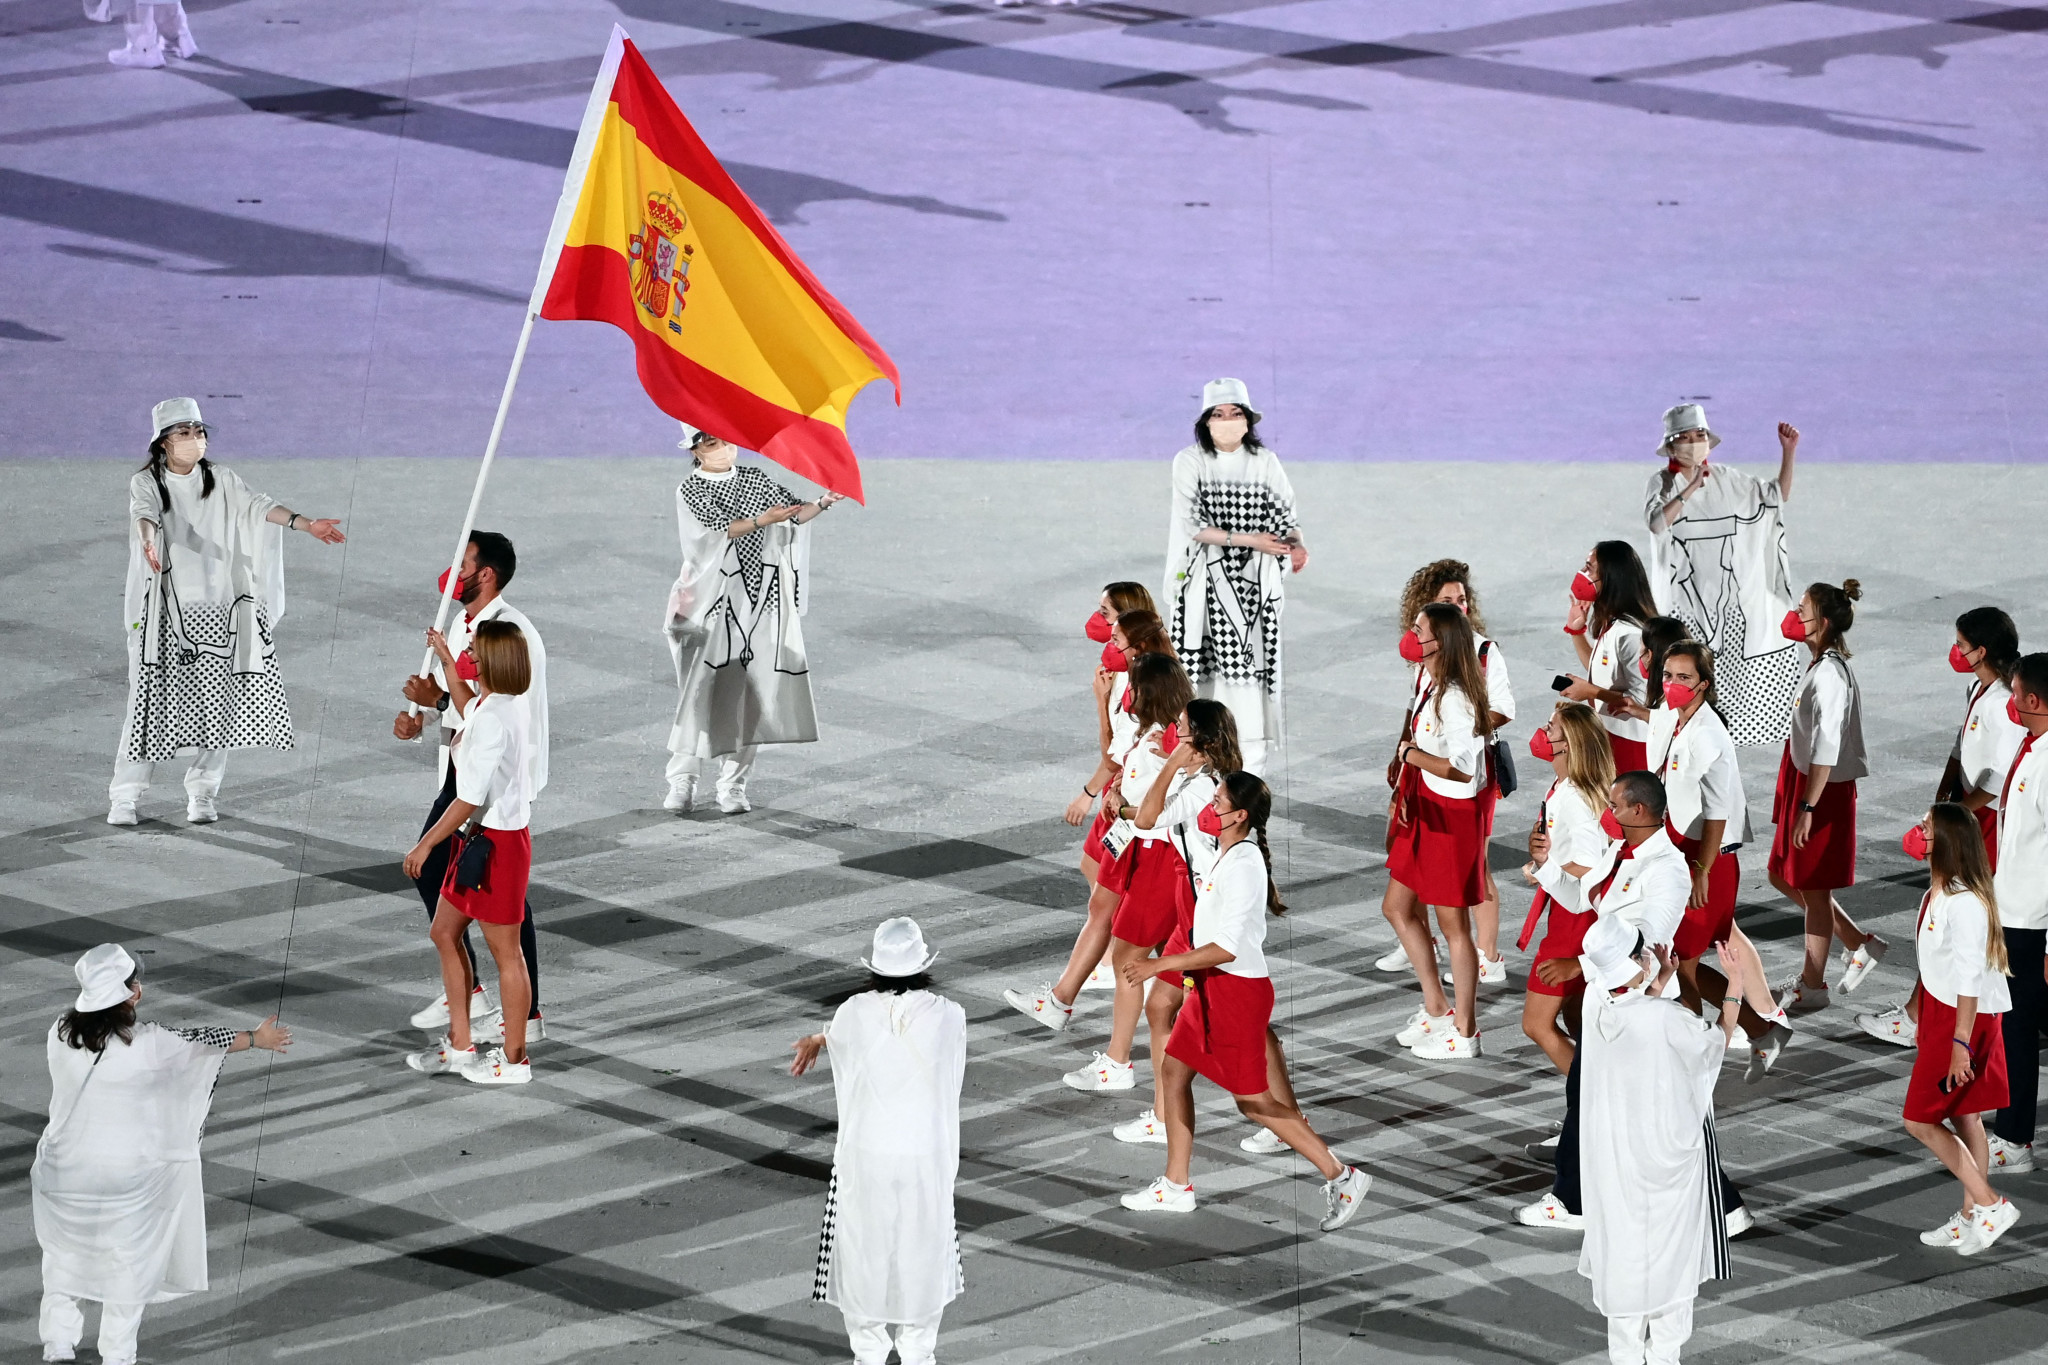 The Spanish Olympic Committee was commended for its use of renewable energy sources in 2020 and 2021 ©Getty Images